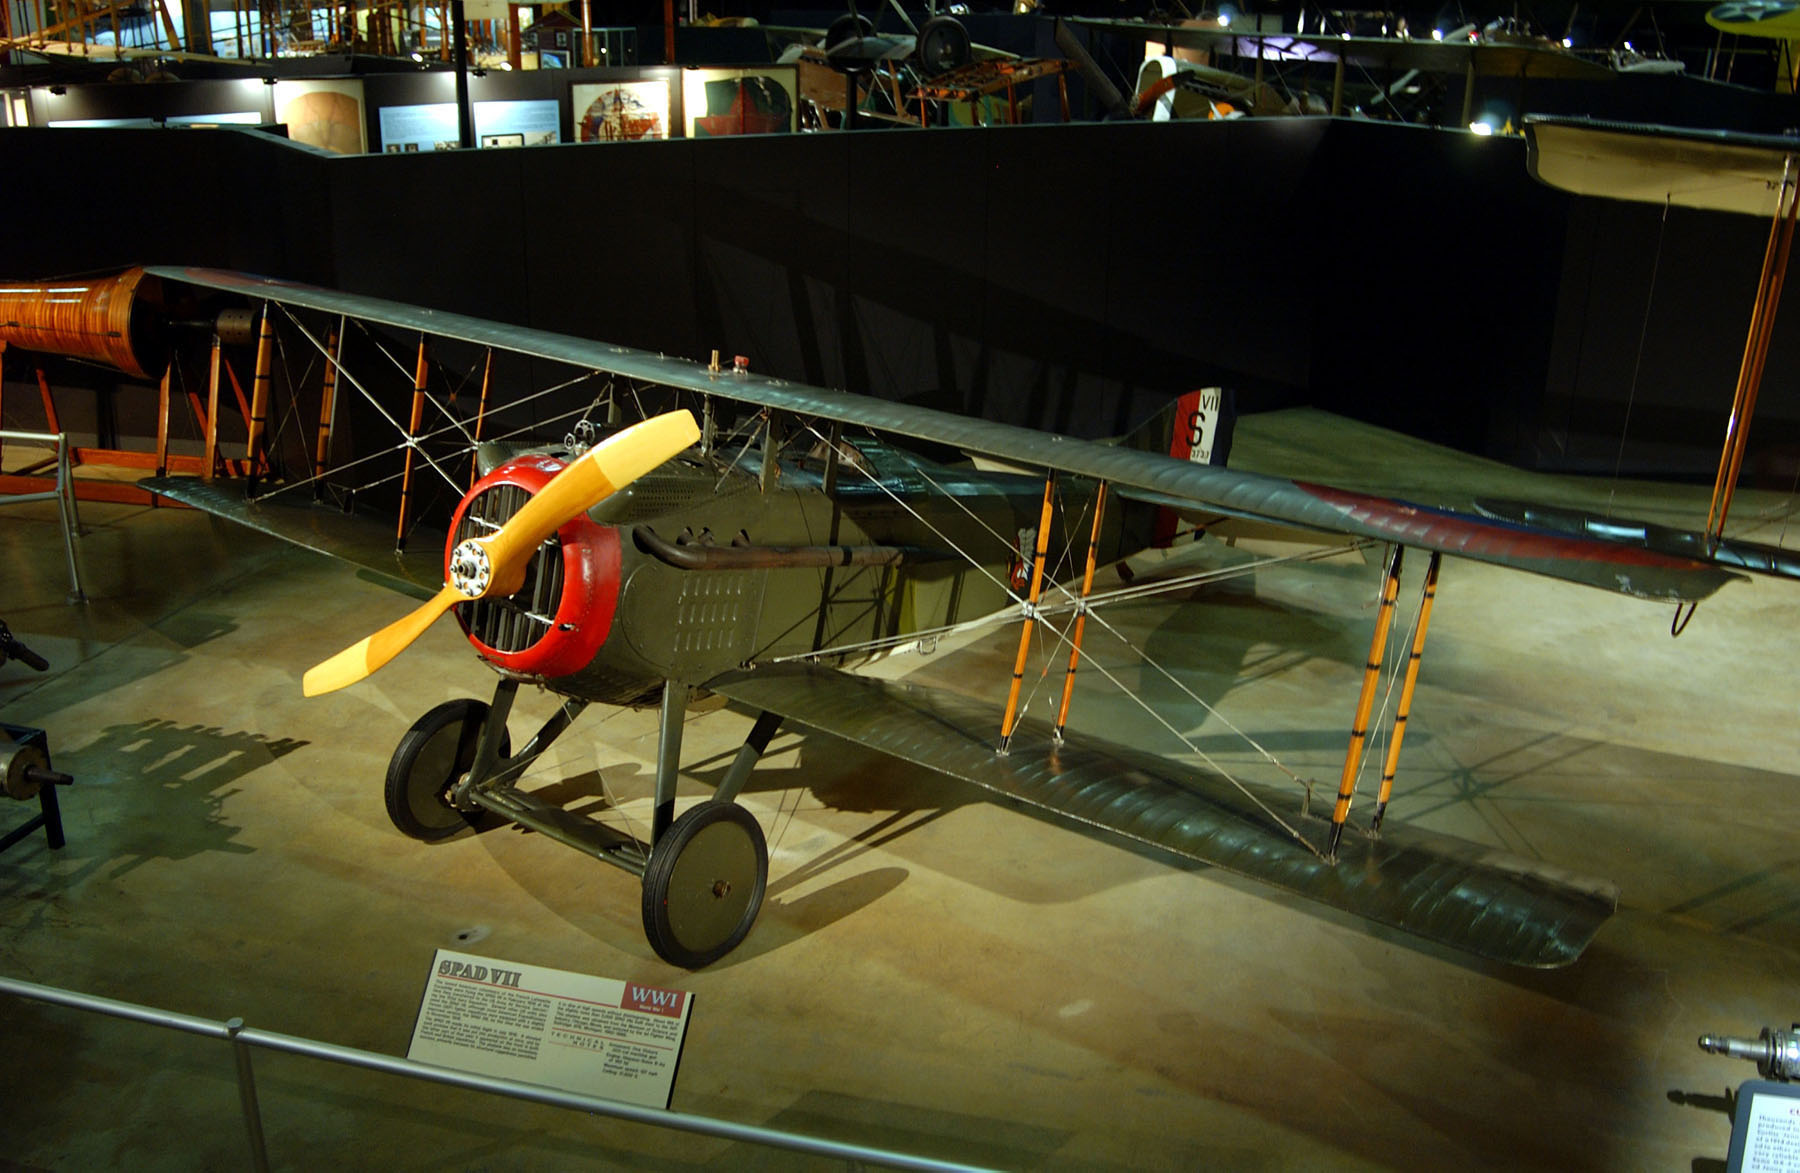 SPAD VII C.1, serial number A.S. 94099, on display at the National Museum of the United States Air Force. (U.S. Air Force)